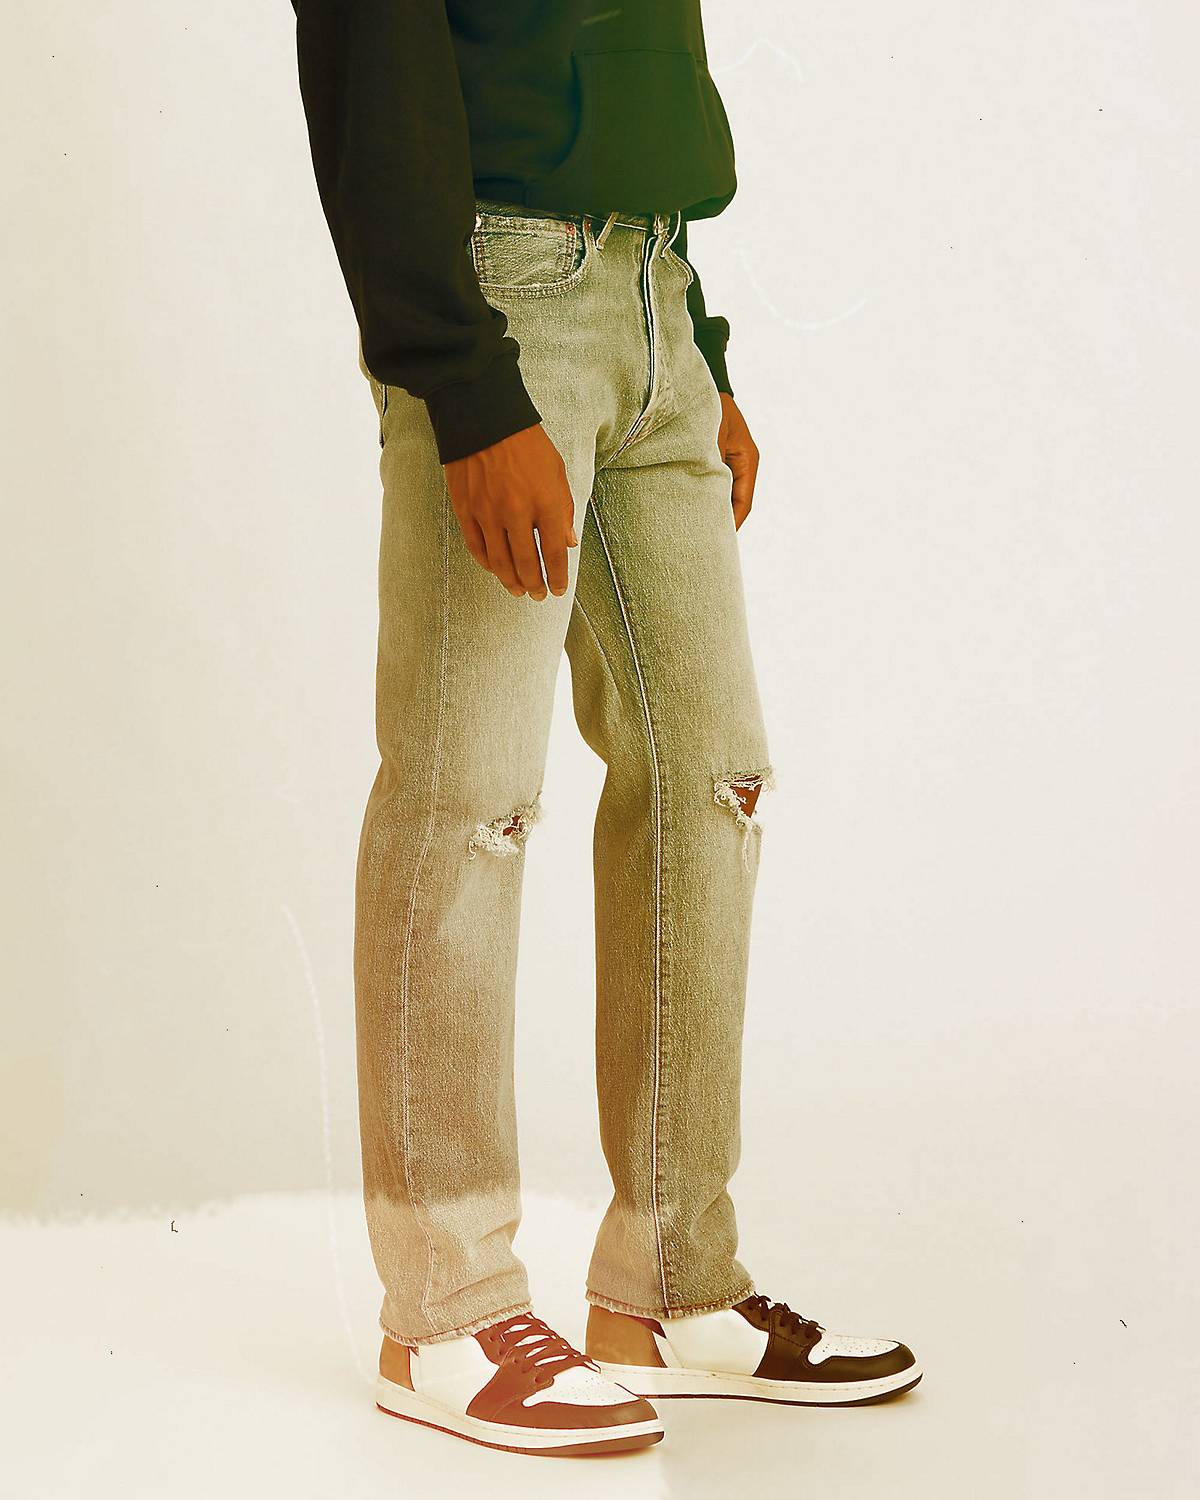 Man wearing jeans behind white wall